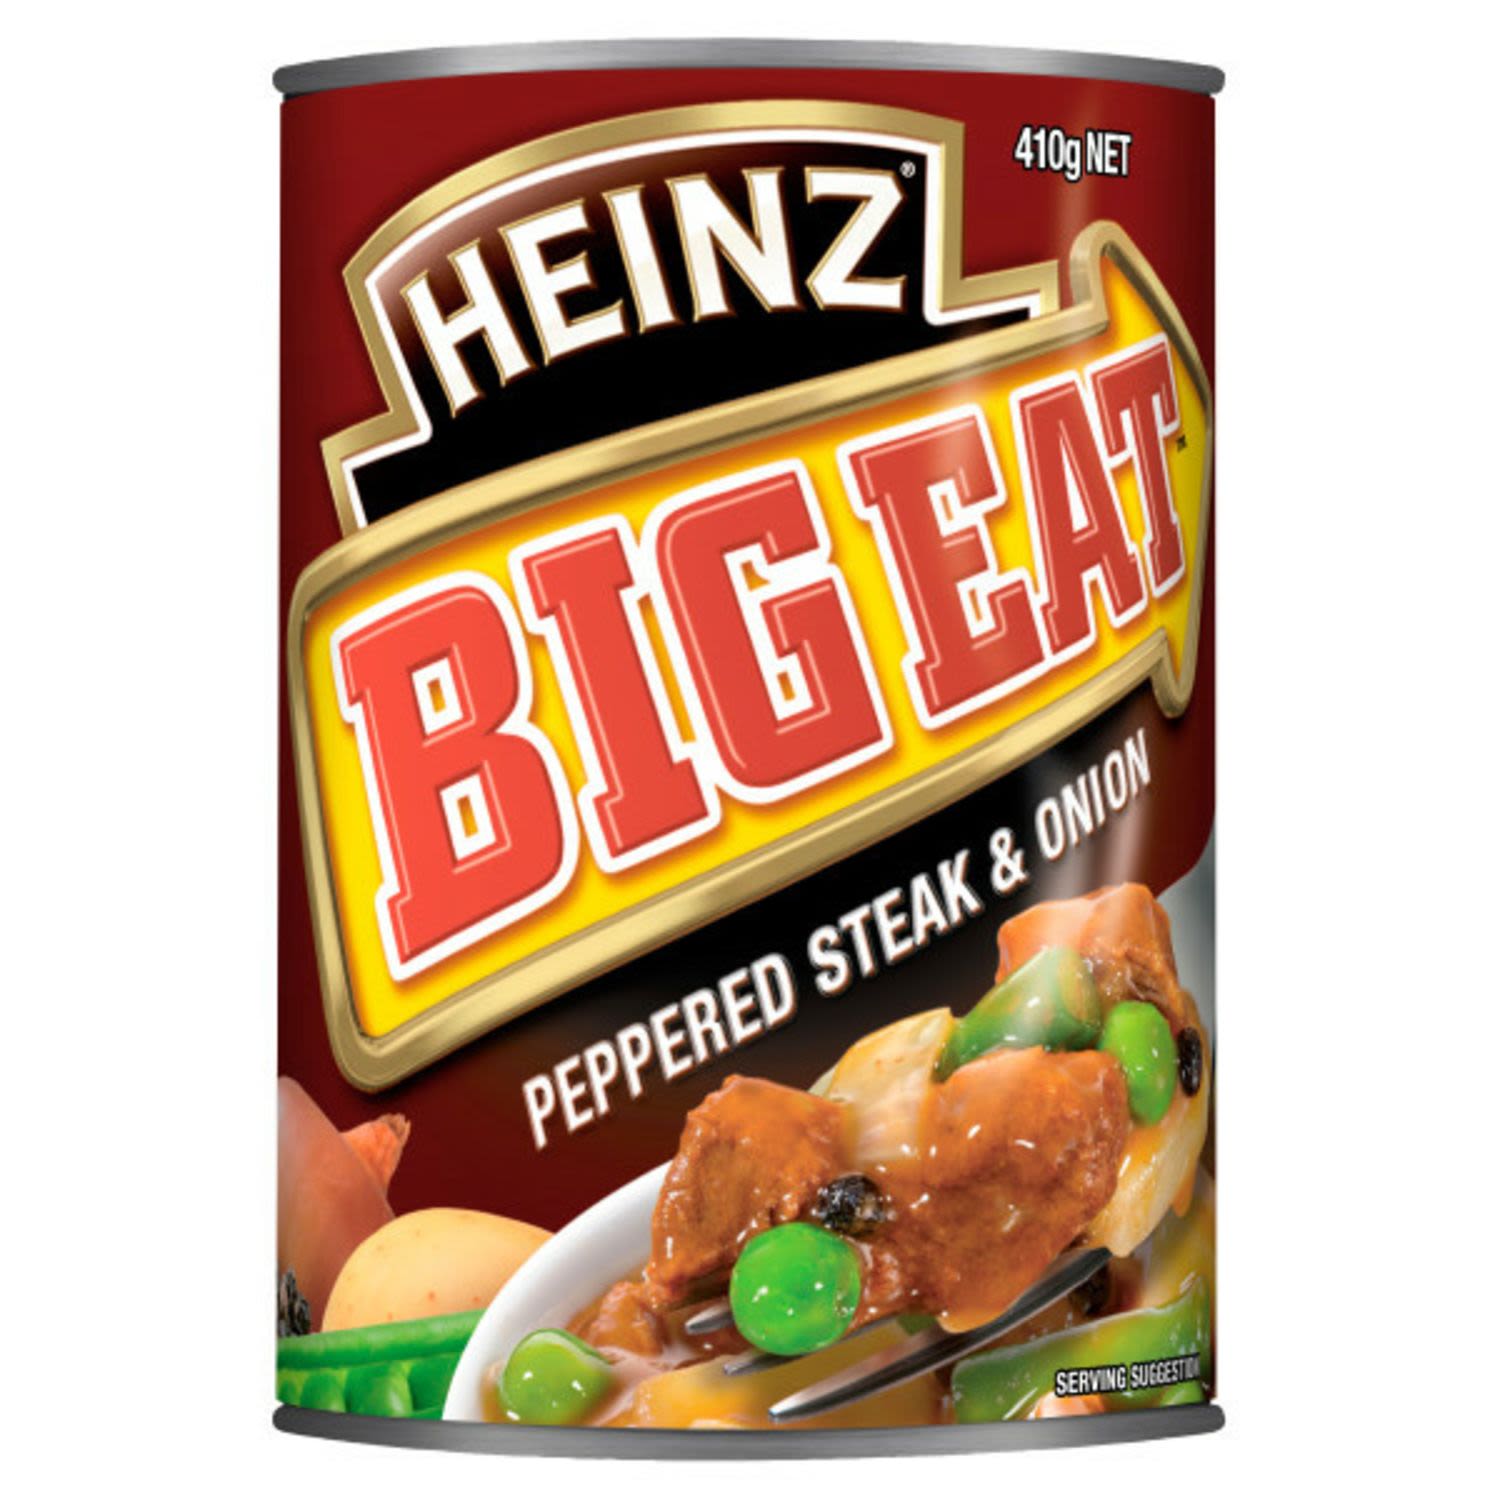 Heinz Big Eat Peppered Steak & Onion Canned Meal, 410 Gram